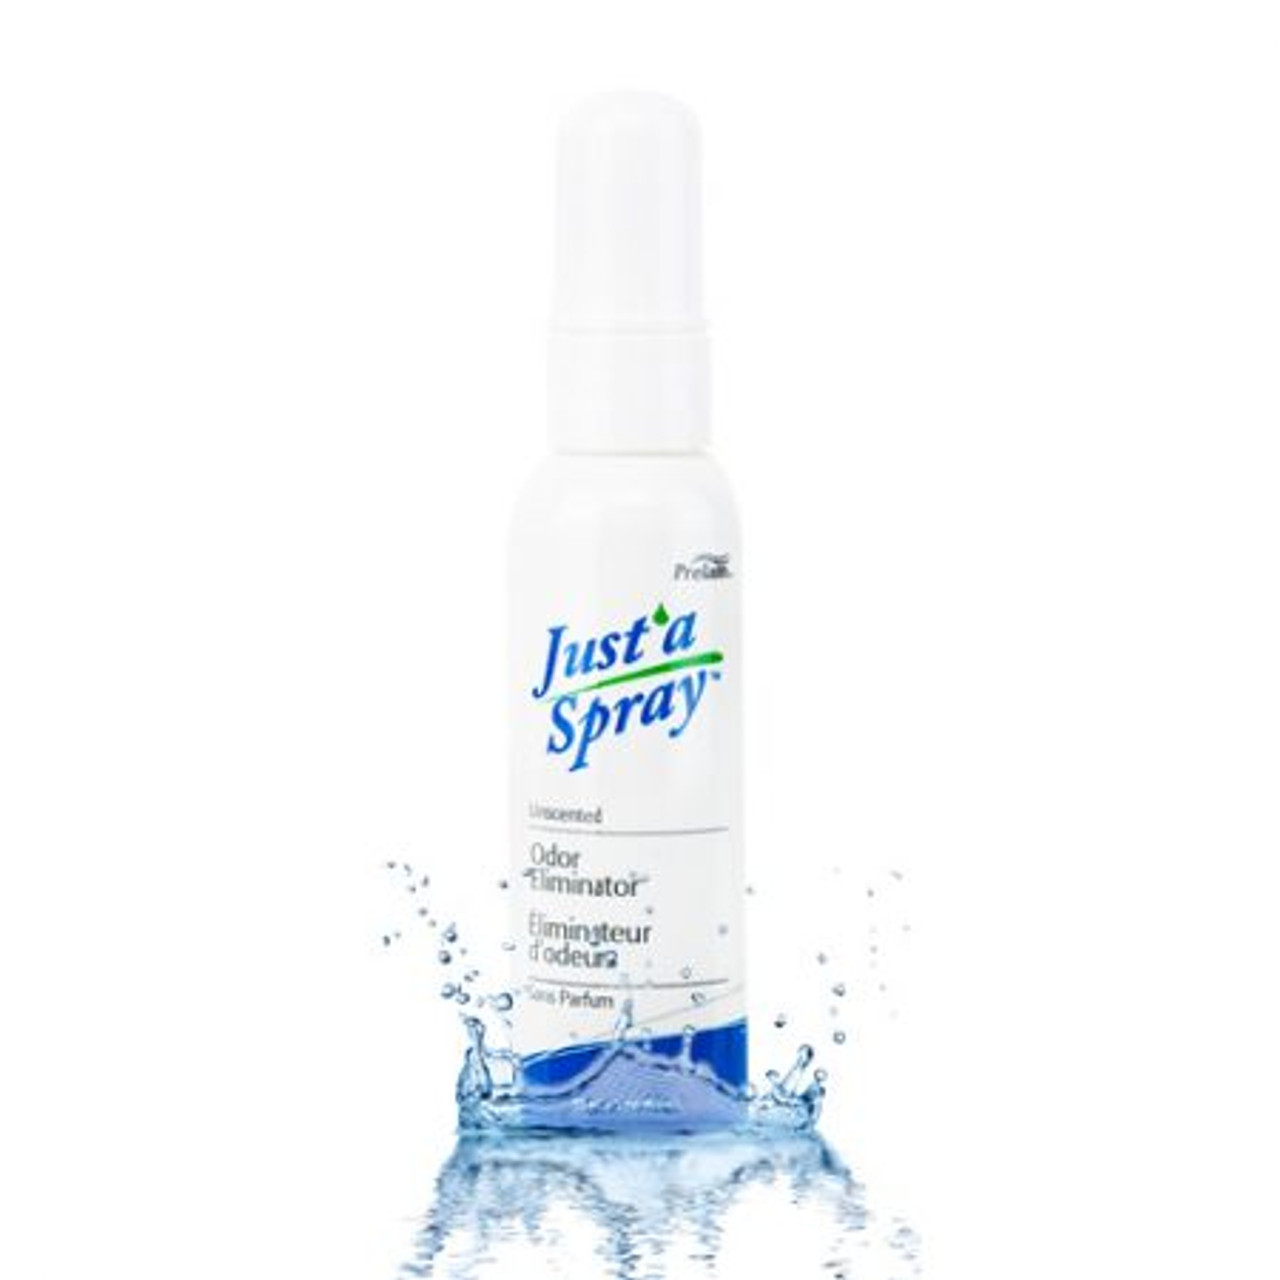 EA/1 JUST-A-SPRAY UNSCENTED 220ML